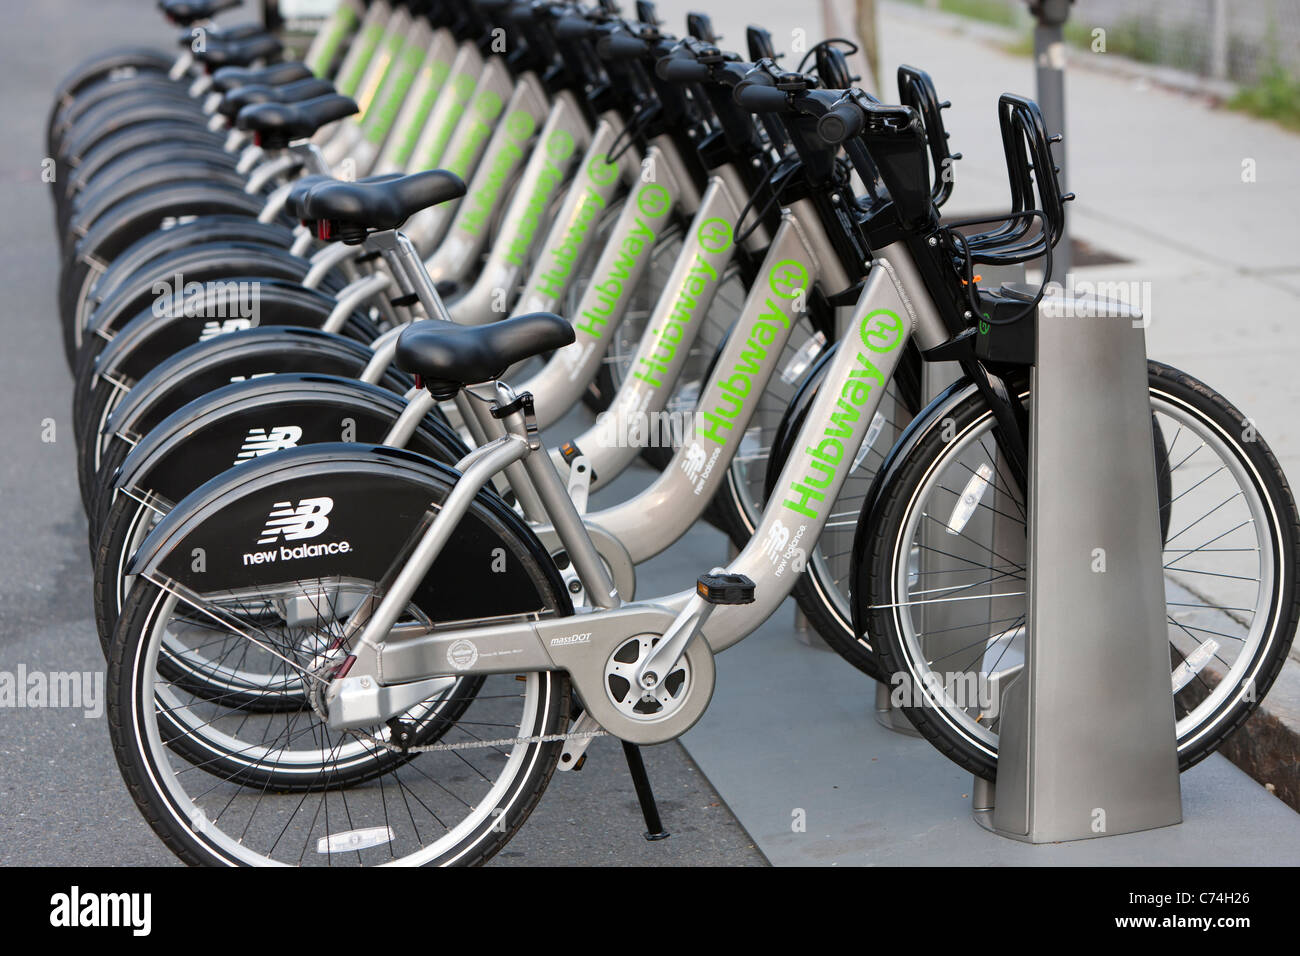 Self service bikes High Resolution Stock Photography and Images - Alamy